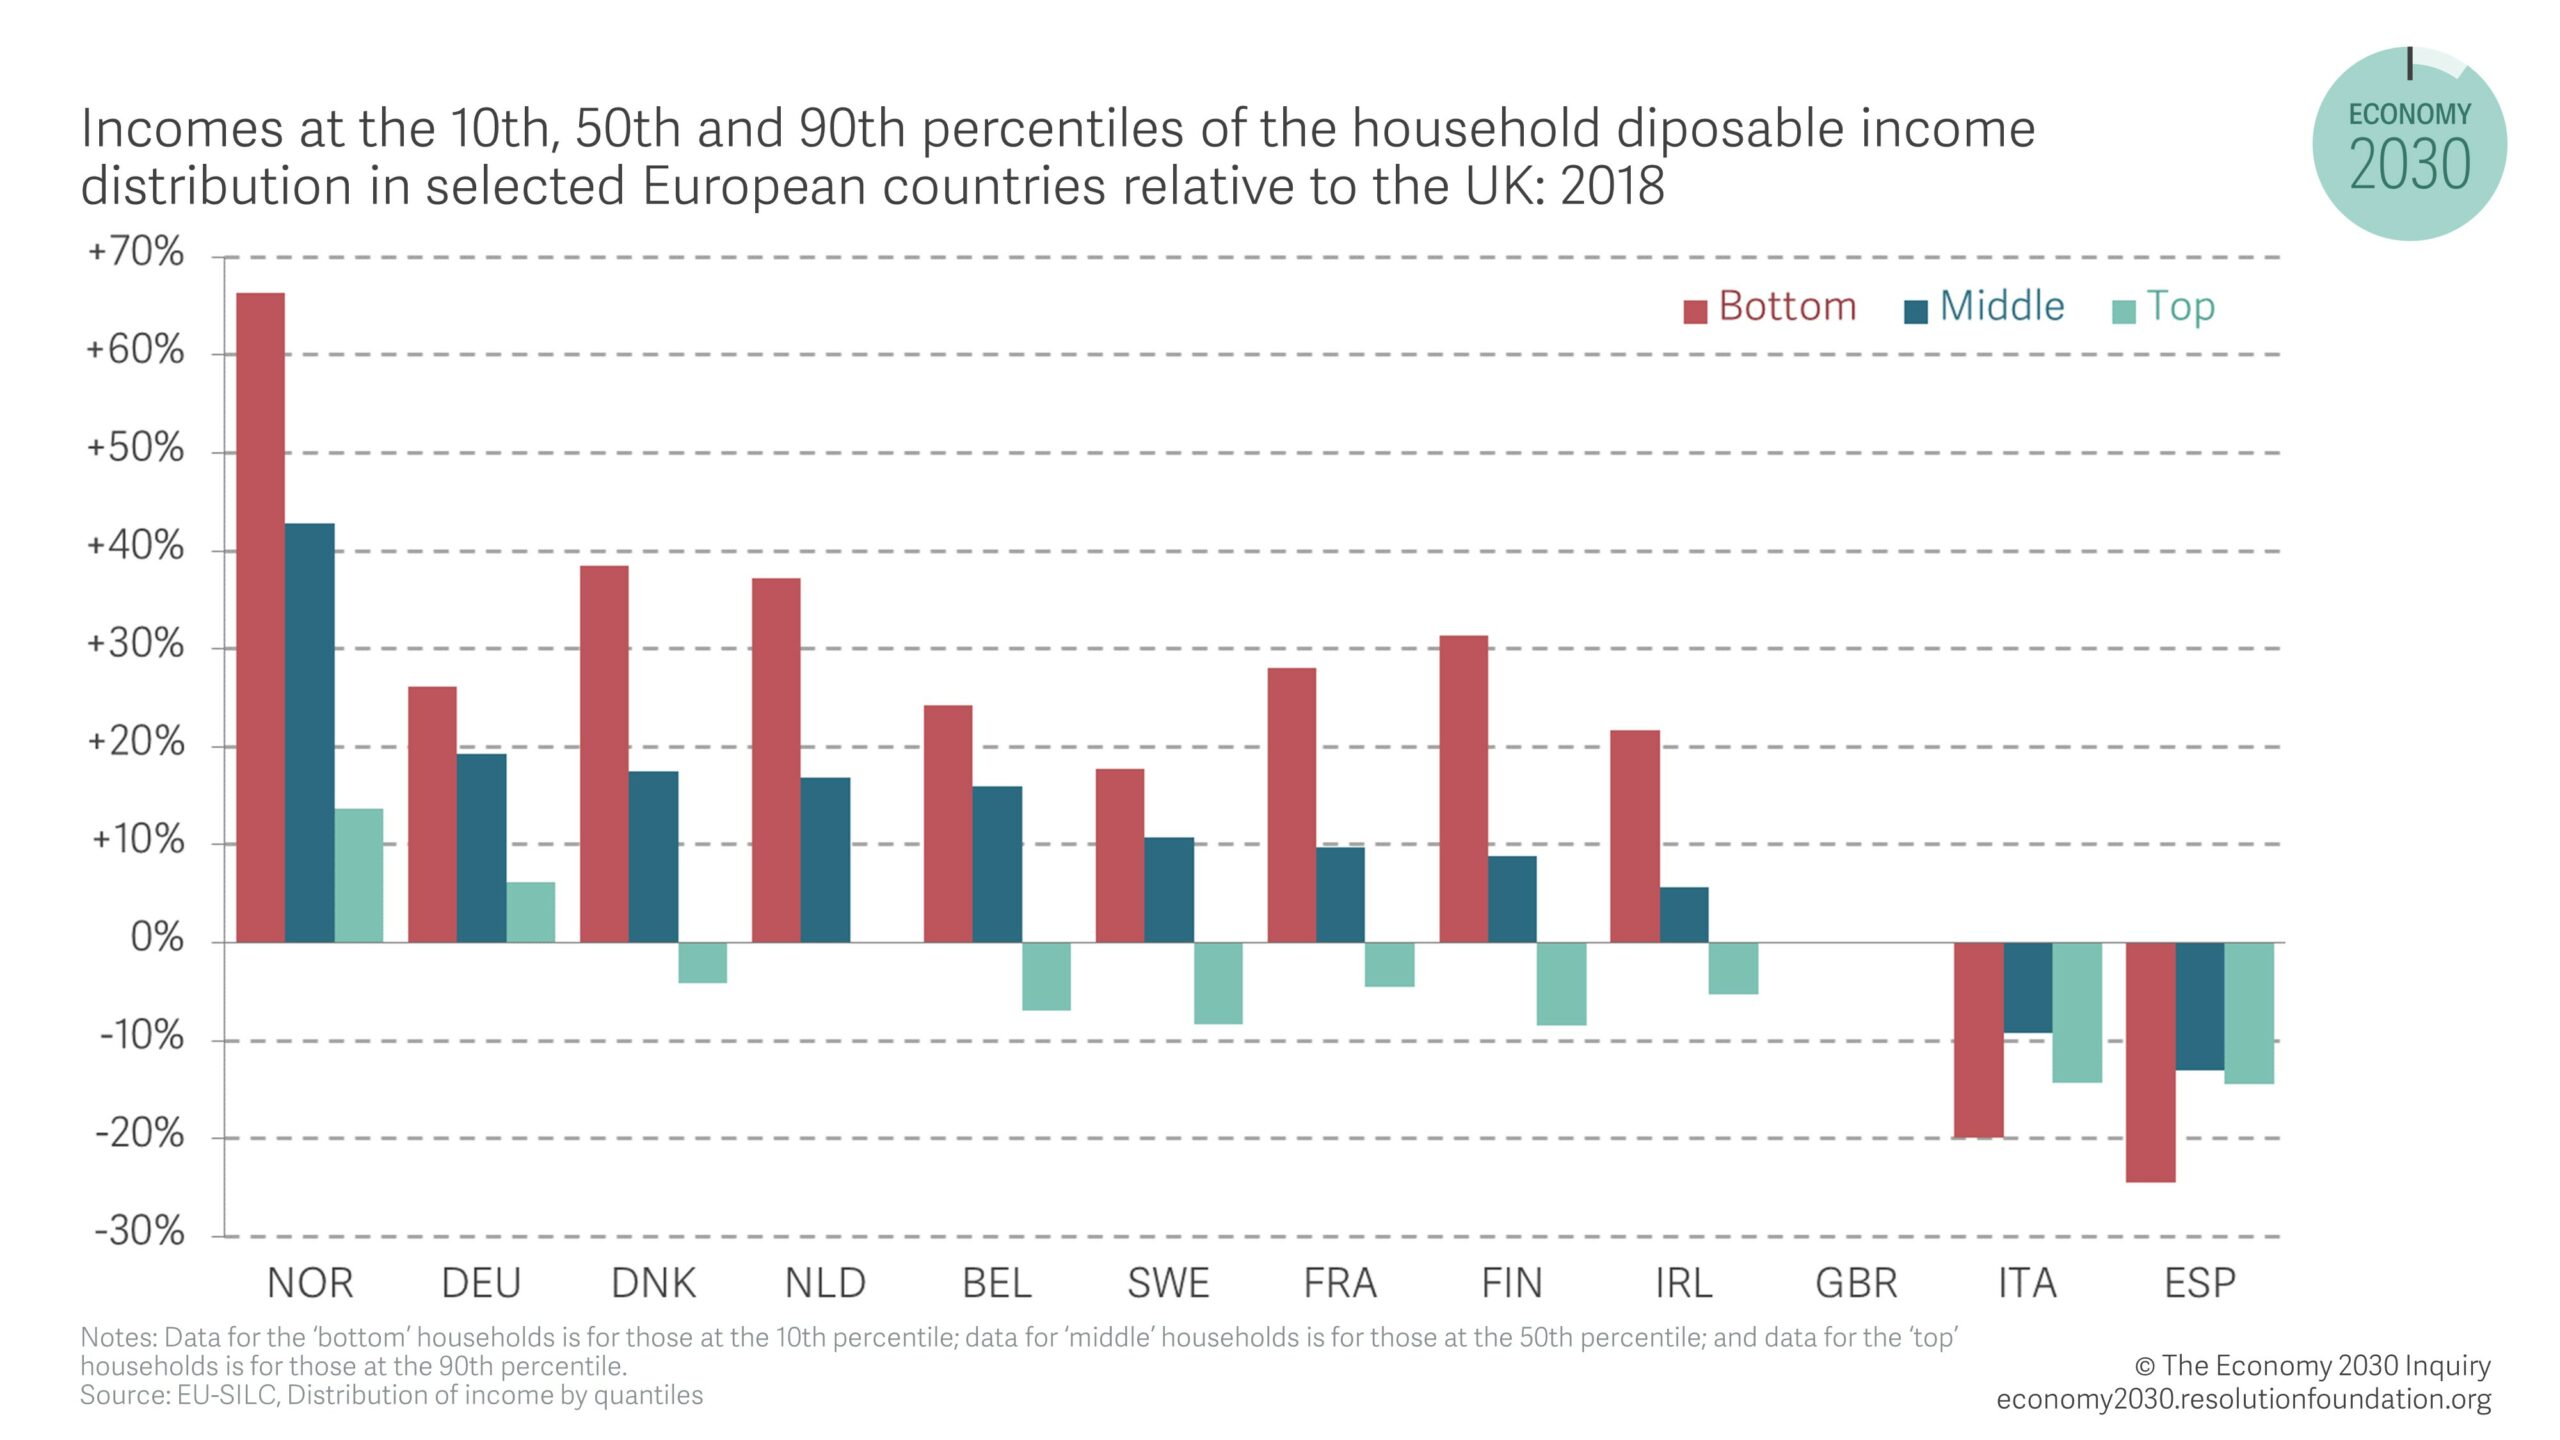 Chart showing incomes at the 10th, 50th and 90th percentiles of the household disposable income distribution in selected European countries relative to the UK: 2018